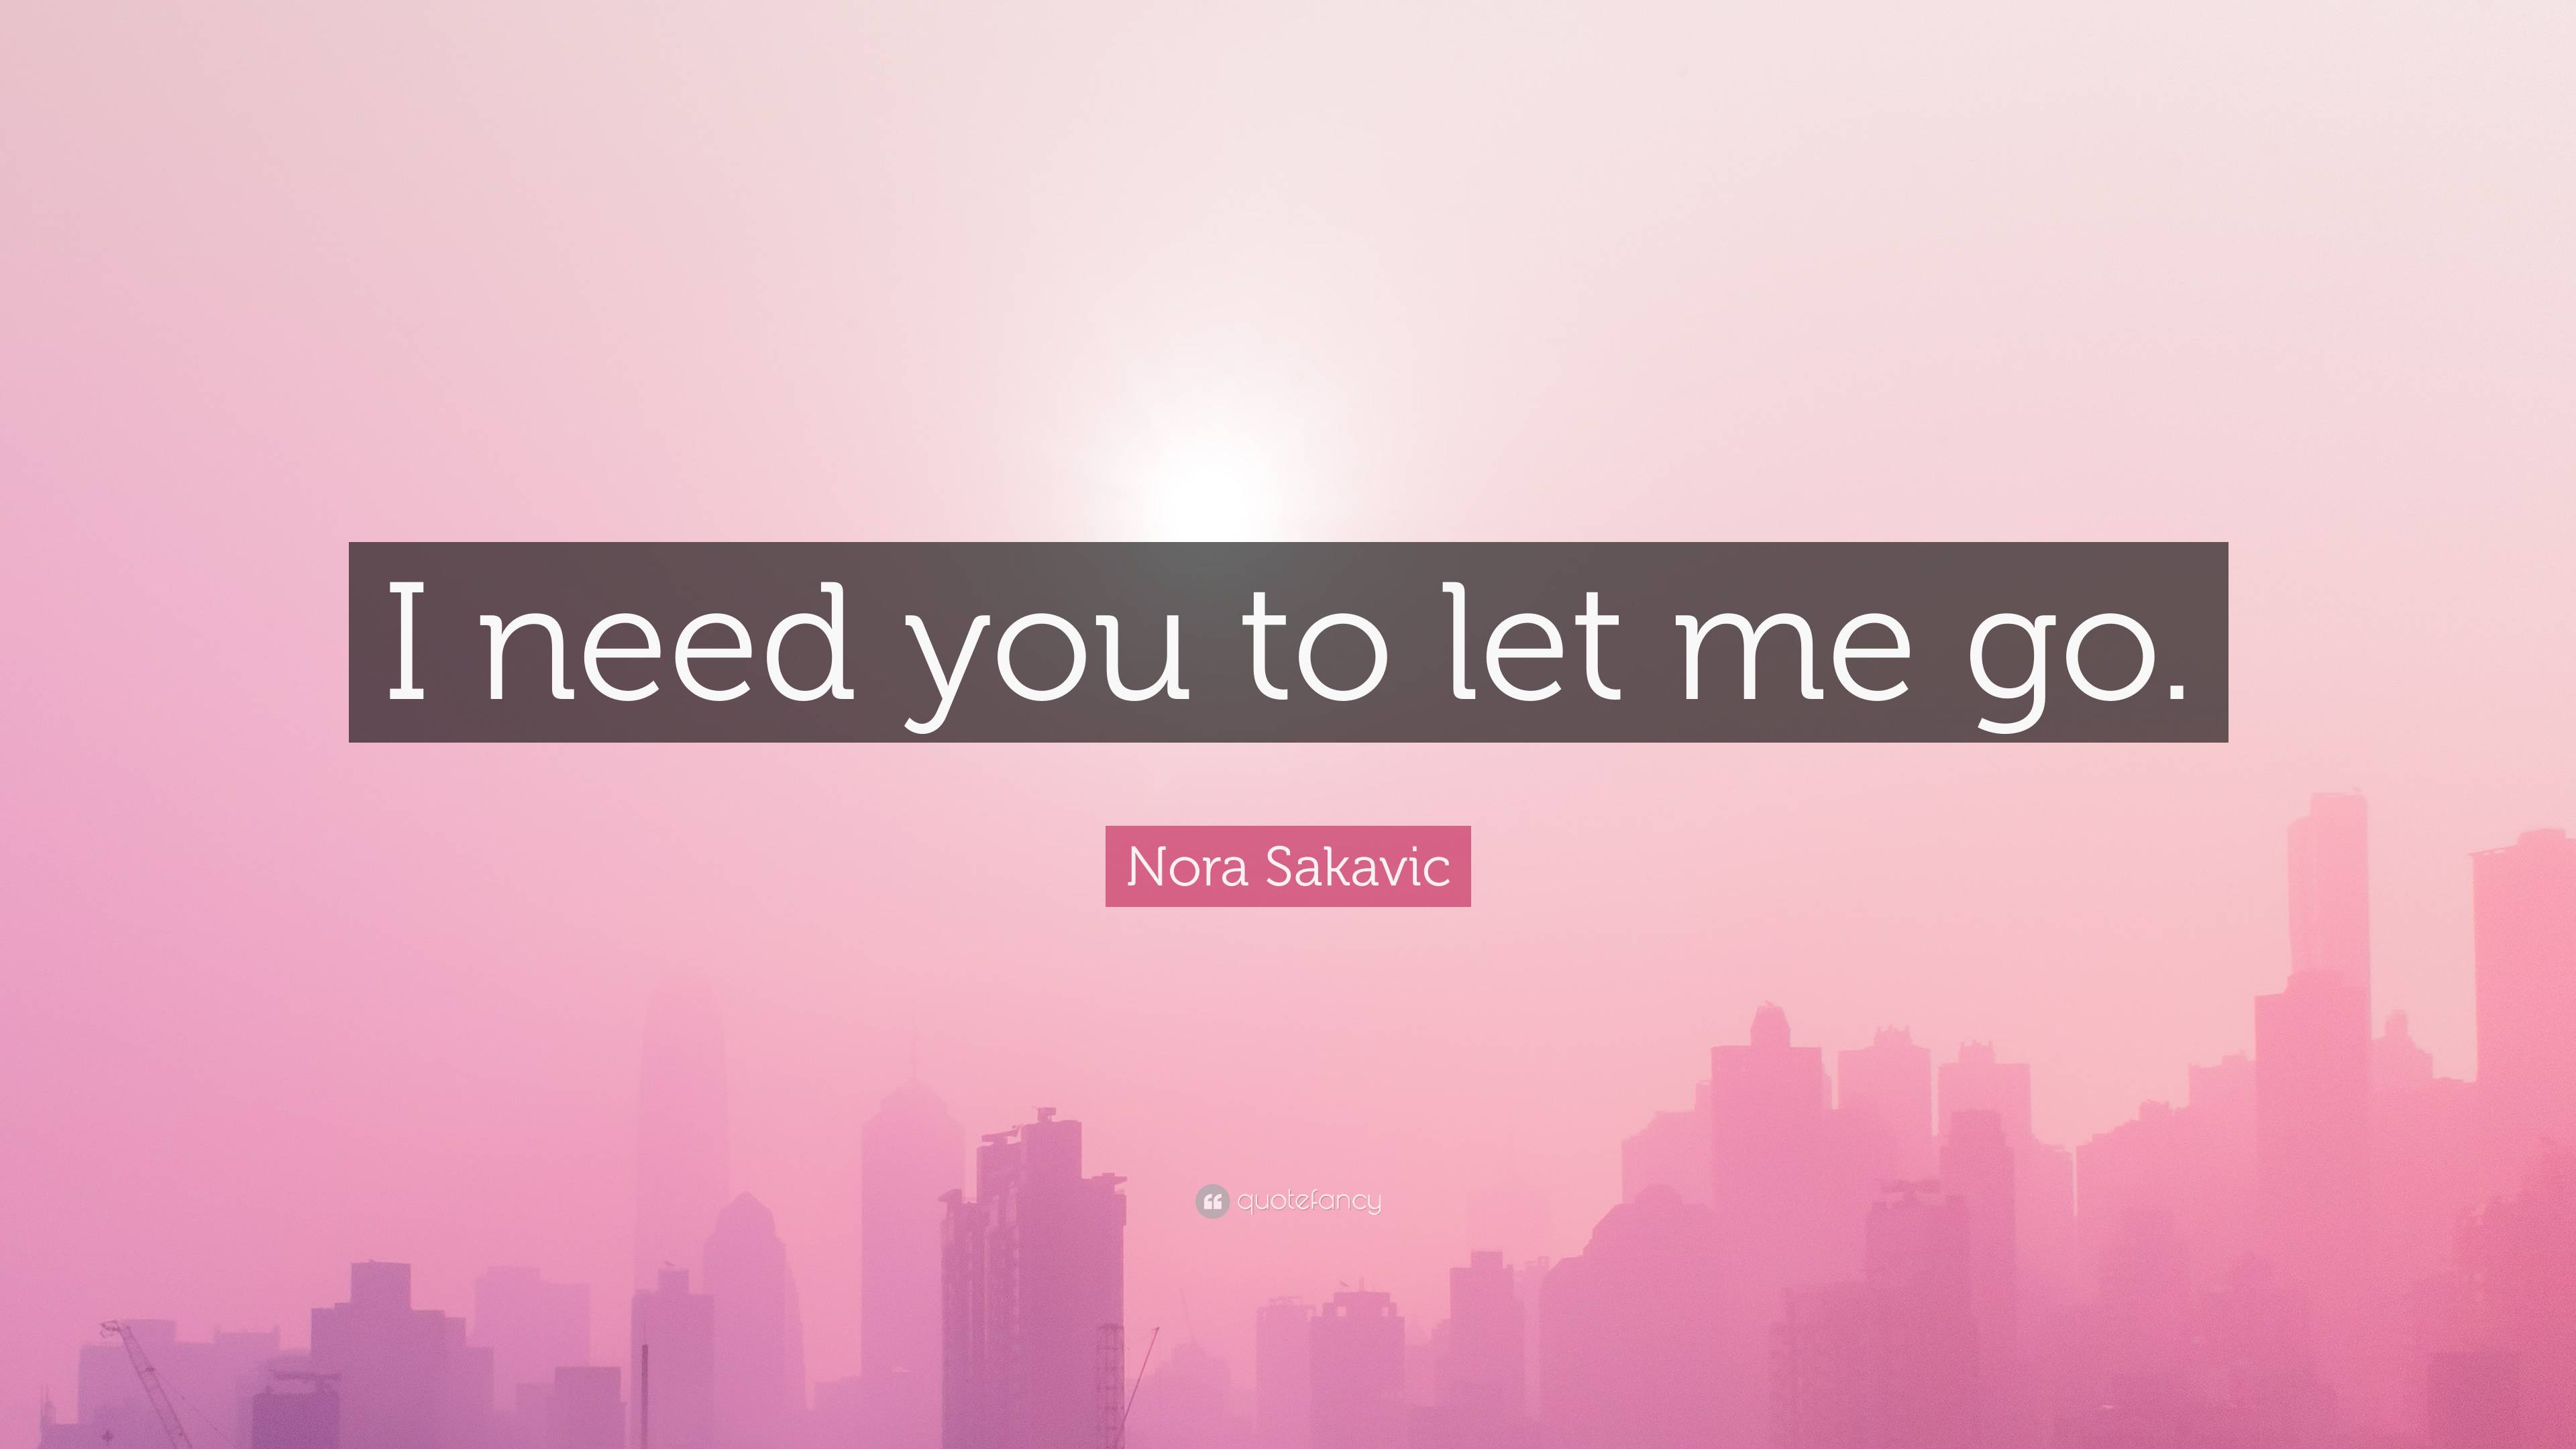 Nora Sakavic Quote: “I need you to let me go.”